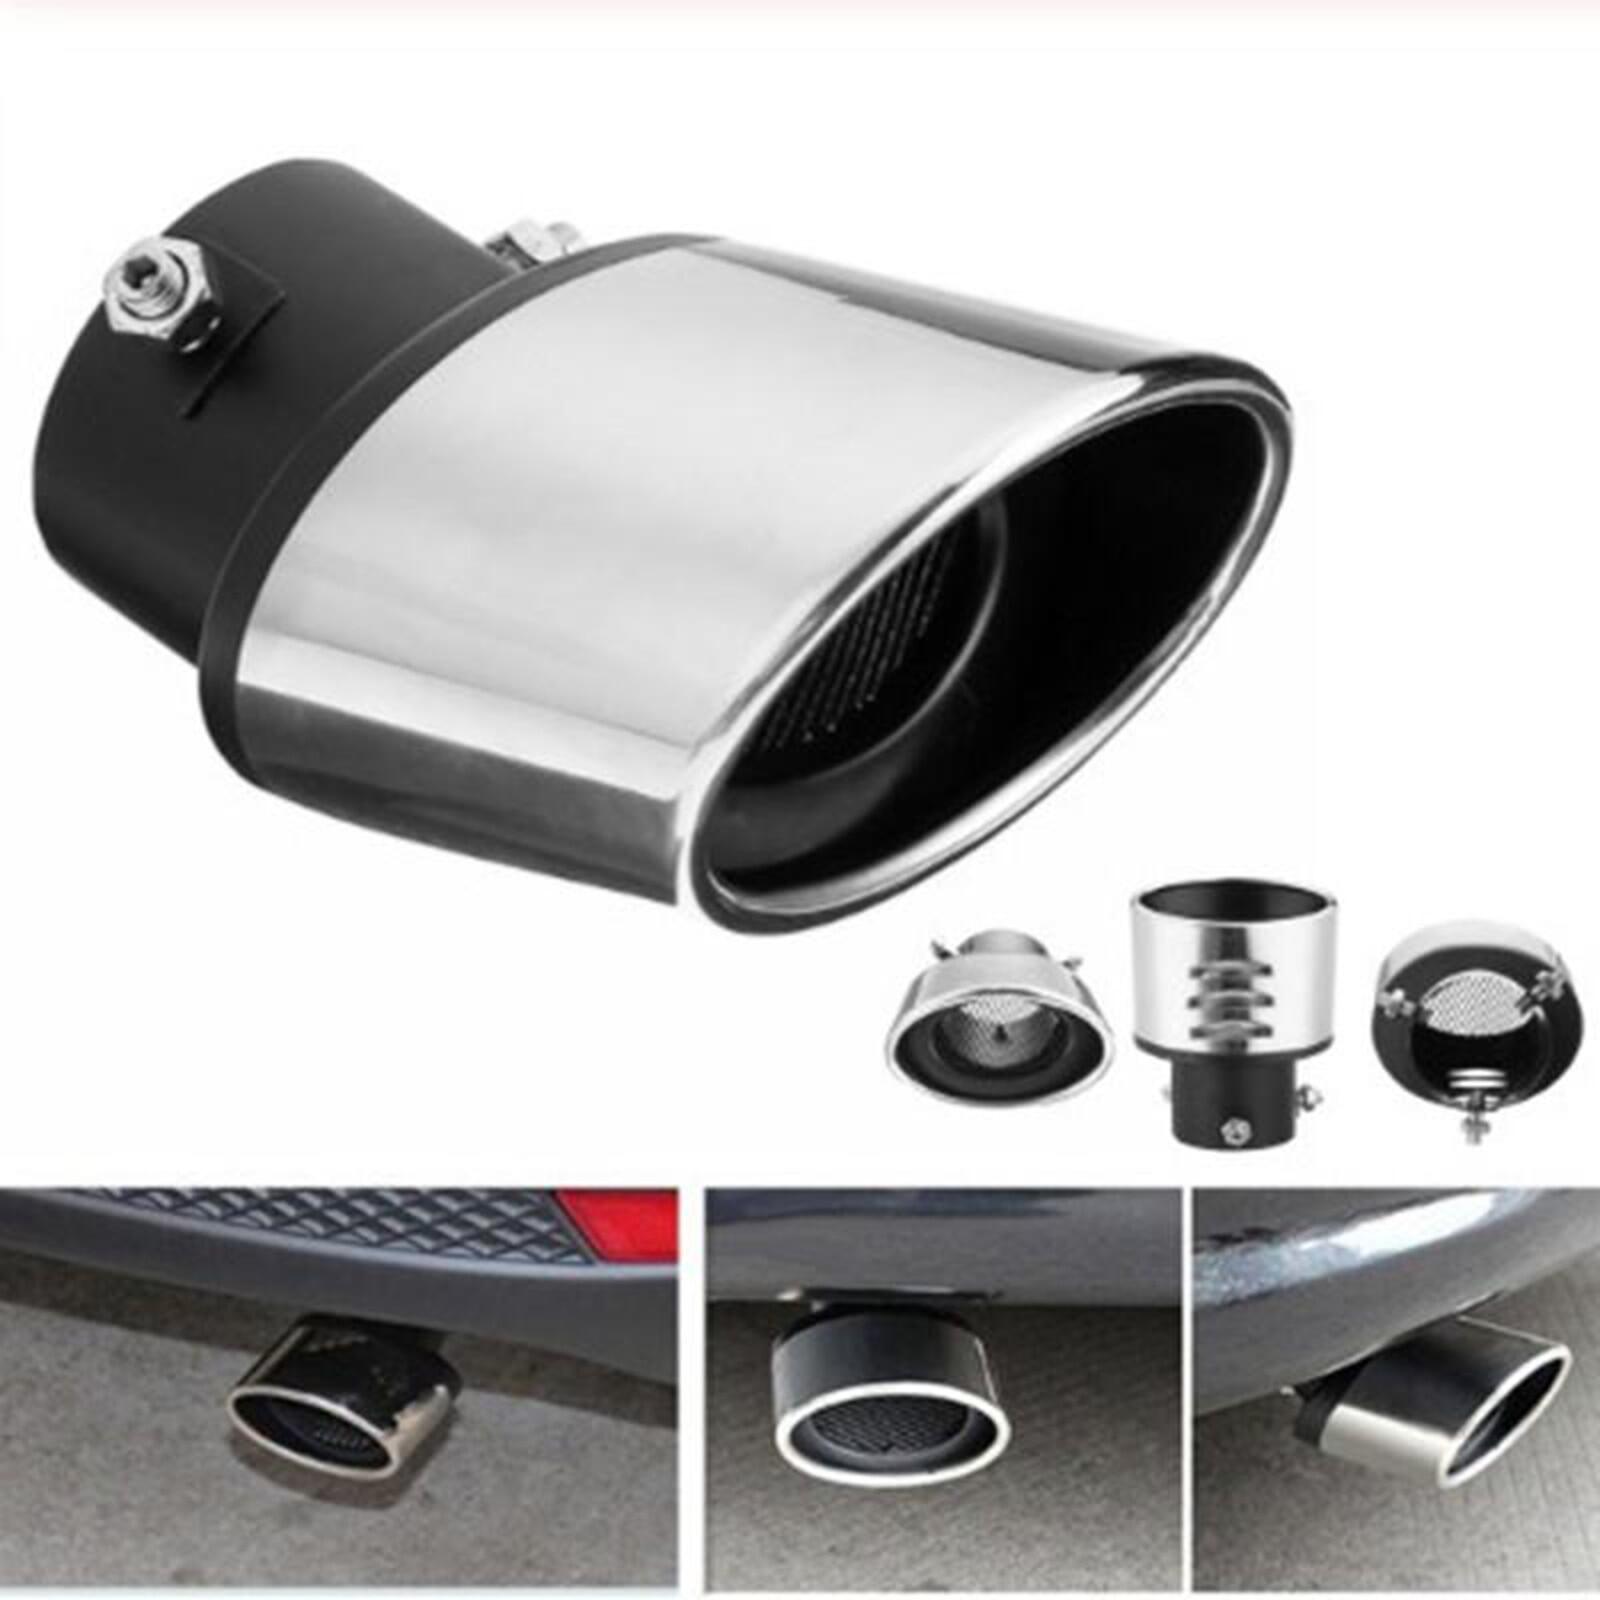 Stainless Steel Car Exhaust Tail Pipe Muffler End Tip for Mazda 5 6